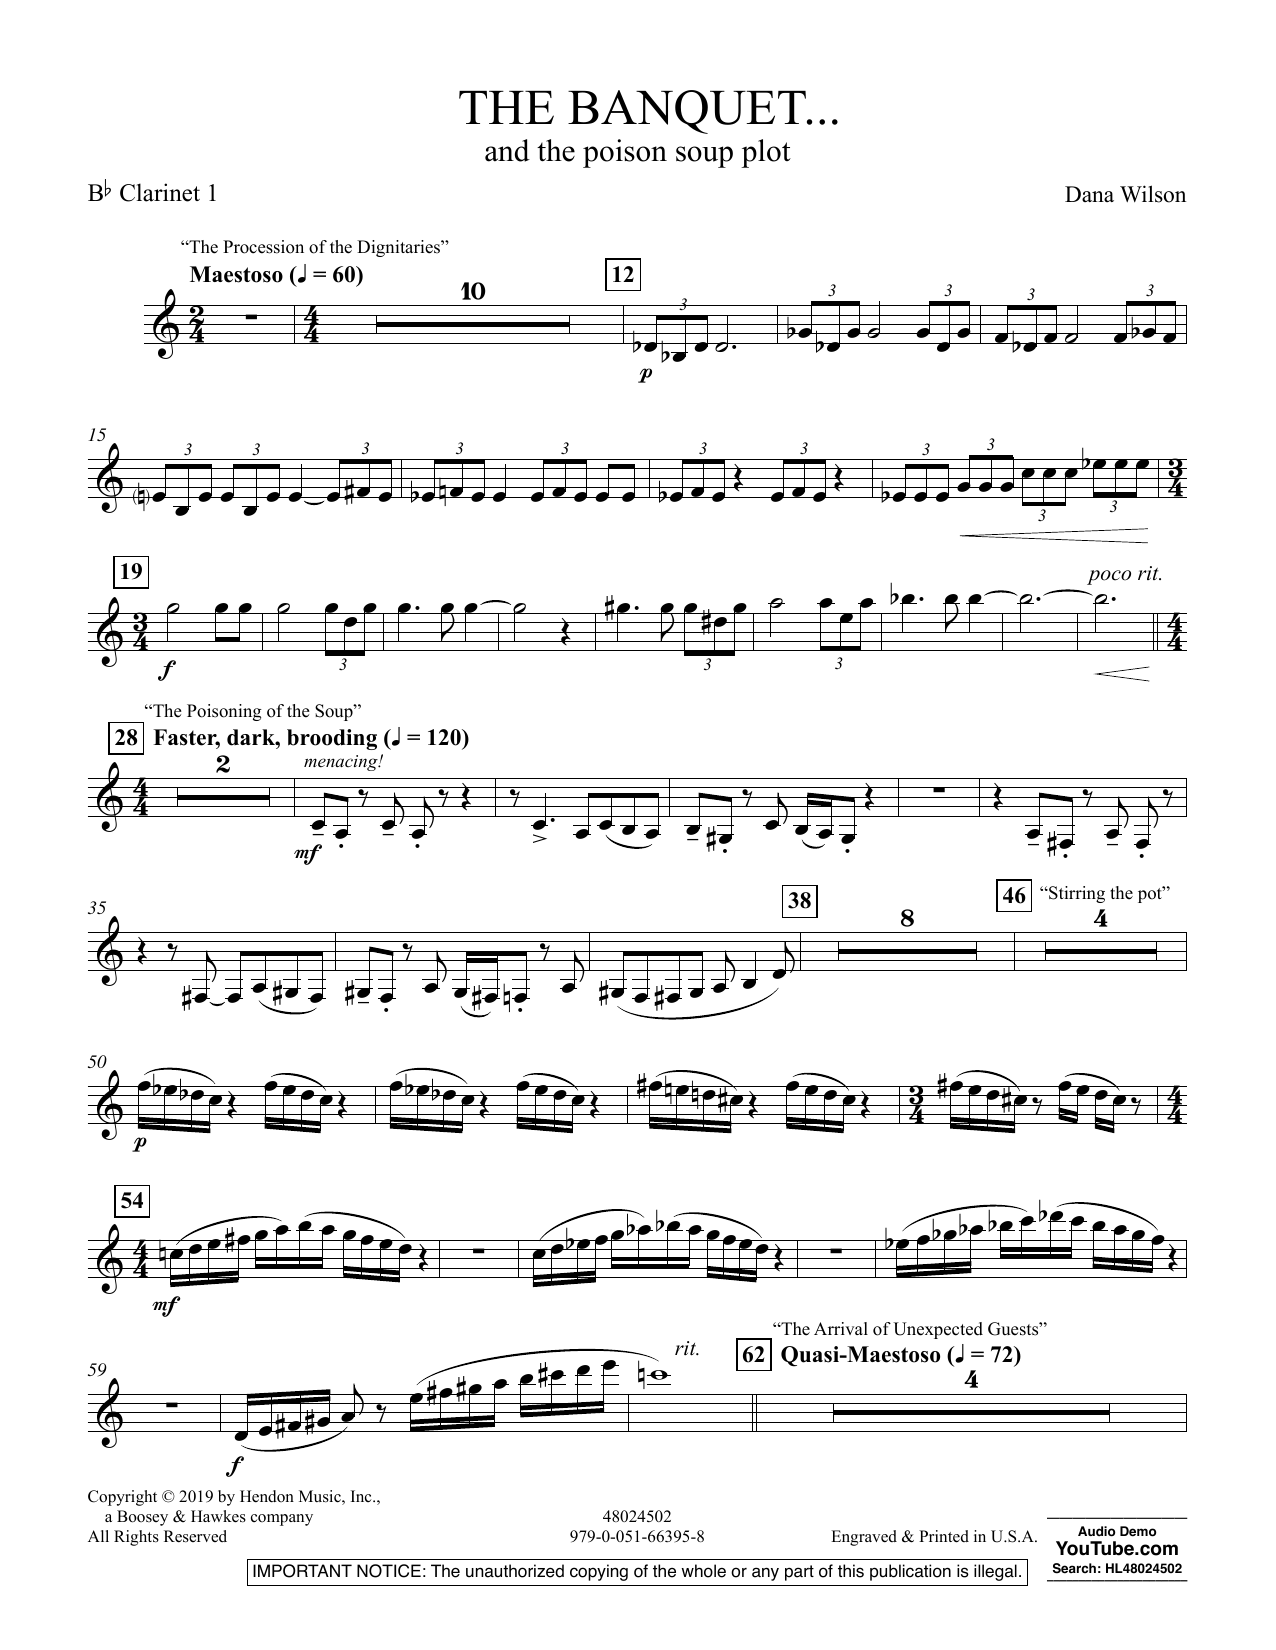 Dana Wilson The Banquet...and the poison soup plot - Bb Clarinet 1 sheet music preview music notes and score for Concert Band including 3 page(s)